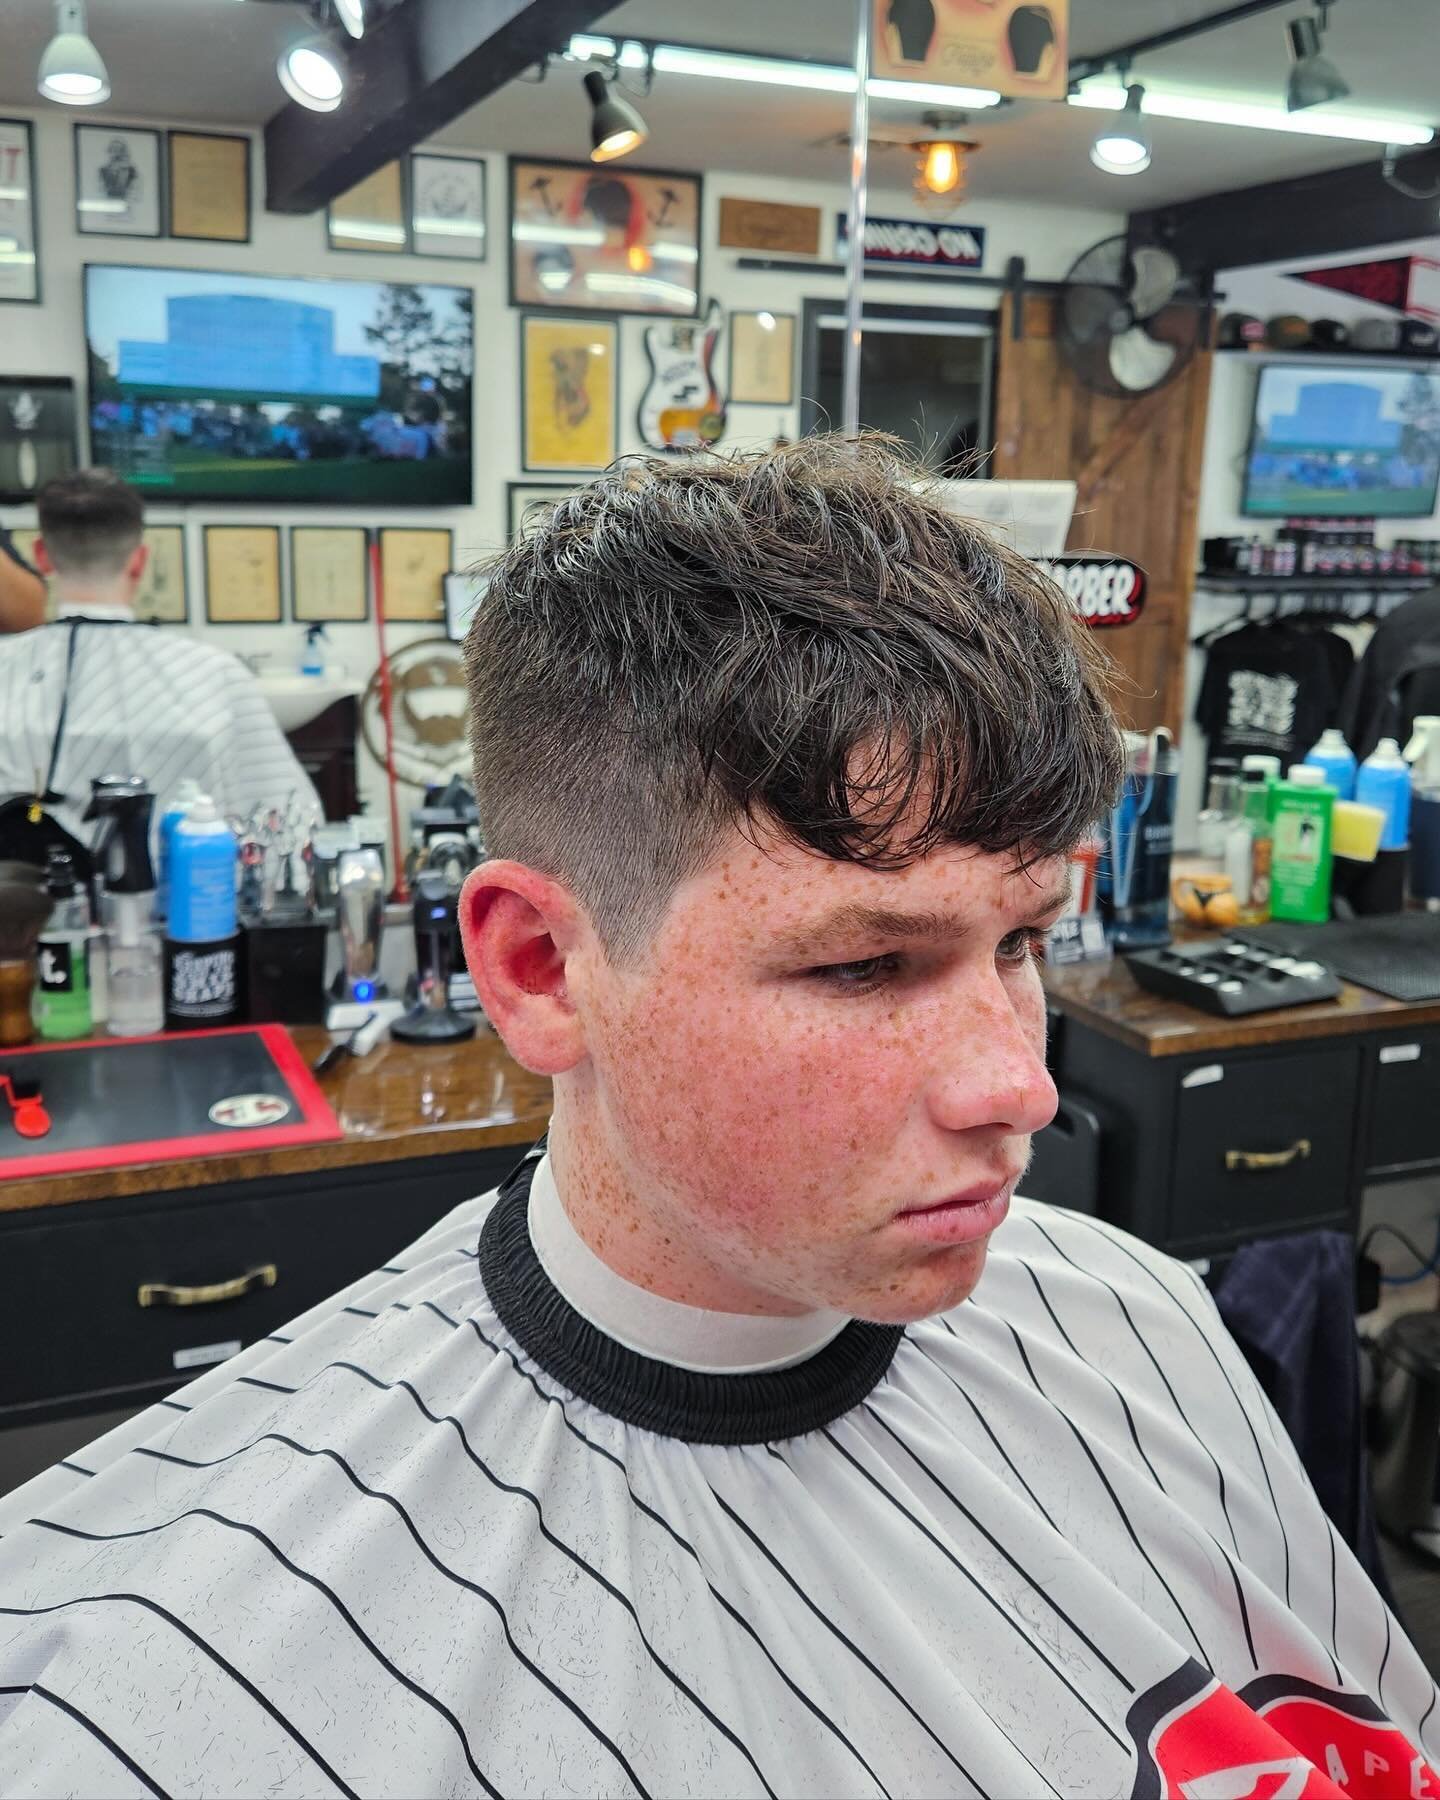 From mullet to messy crop. Done by Rodney.
.
Appointments can be booked anytime at flagshipbarbershop.com